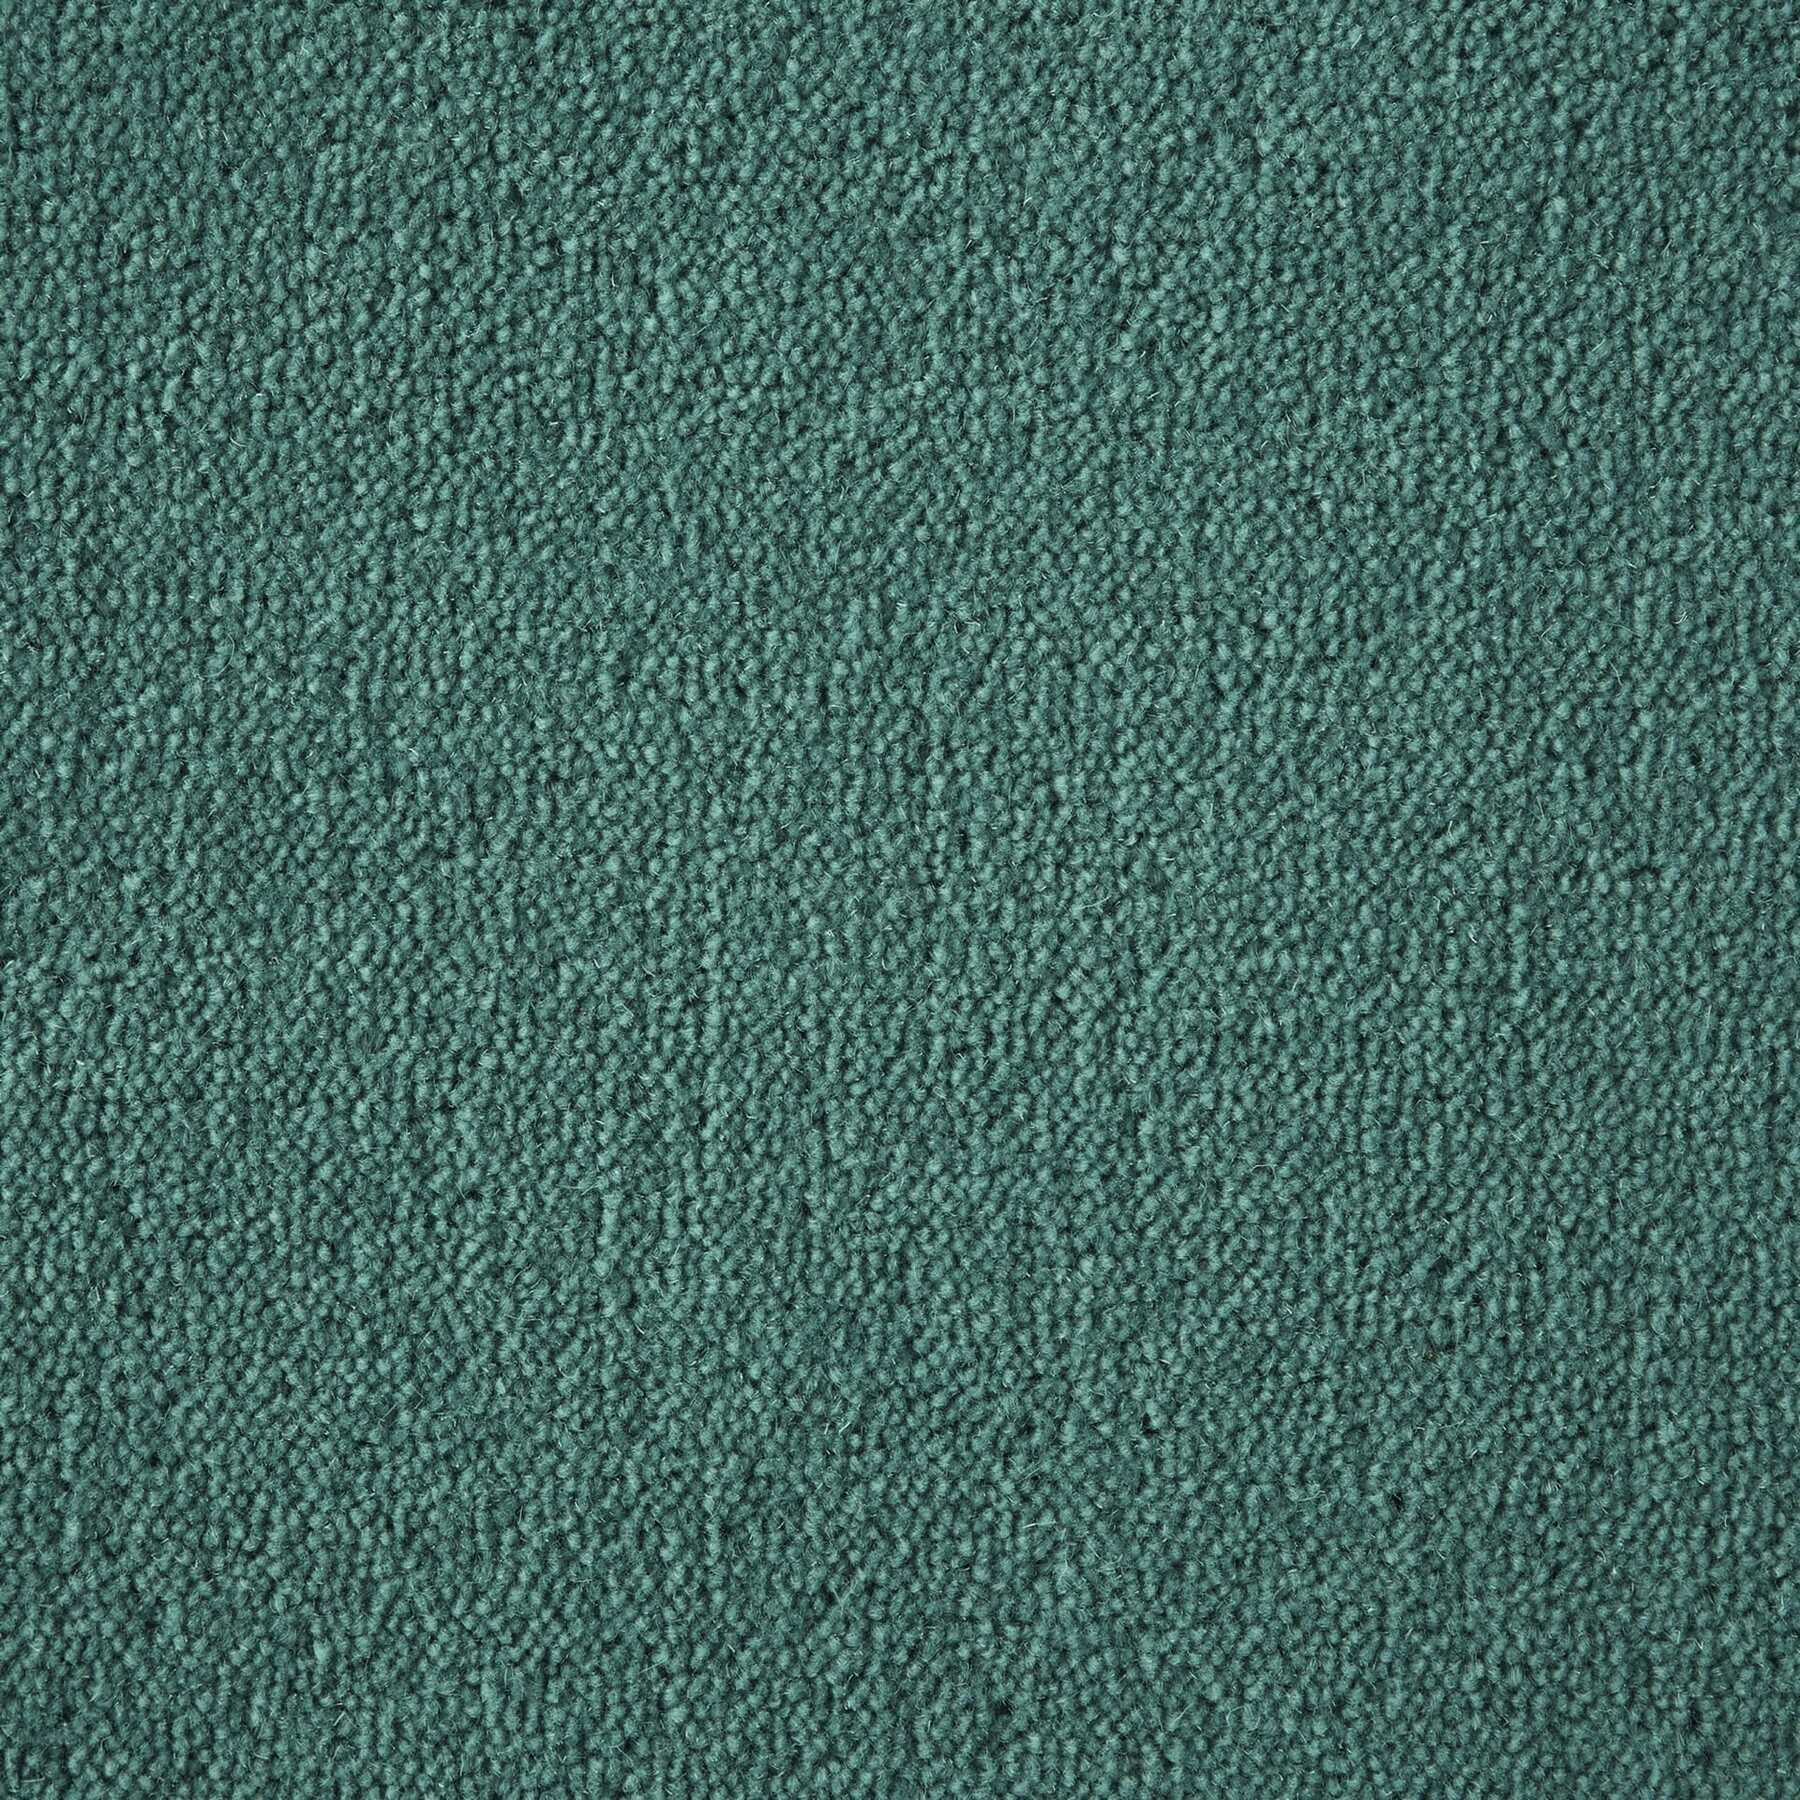 Ultima Twist Collection Spearmint carpet by Westex